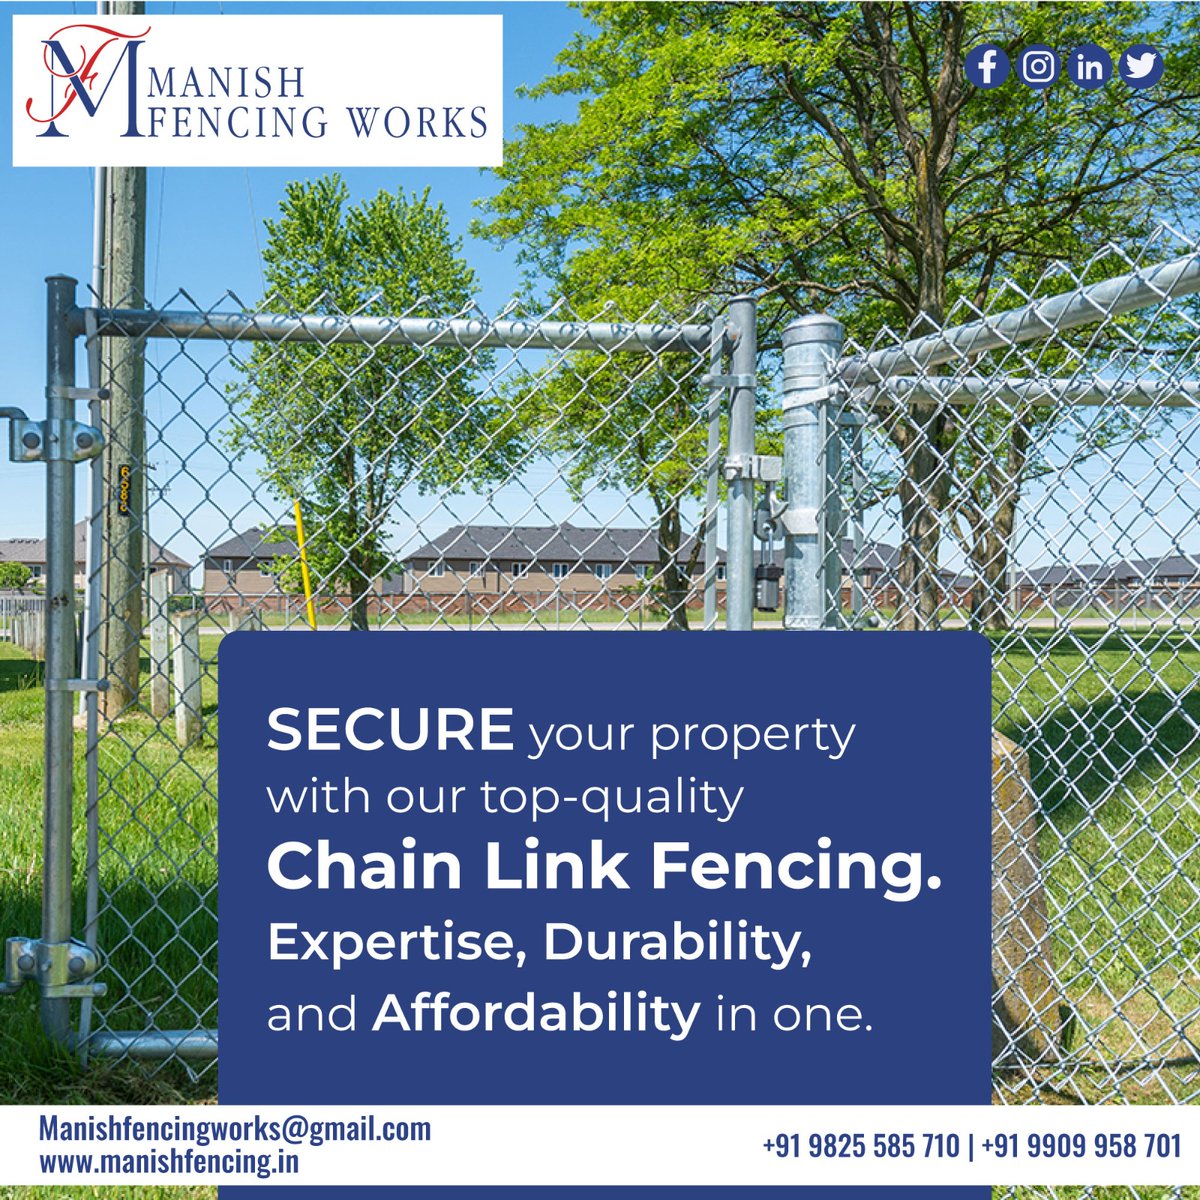 Secure your property with our top-quality chain link fencing – where expertise, durability, and affordability unite. 

#ManishFencingWorks #chainlink #wirefencing #ReliableDefense #bestquality #FencingSolutions #SafeAndSecure #GetFenced #FencingInstallation #wire #ahmedabad